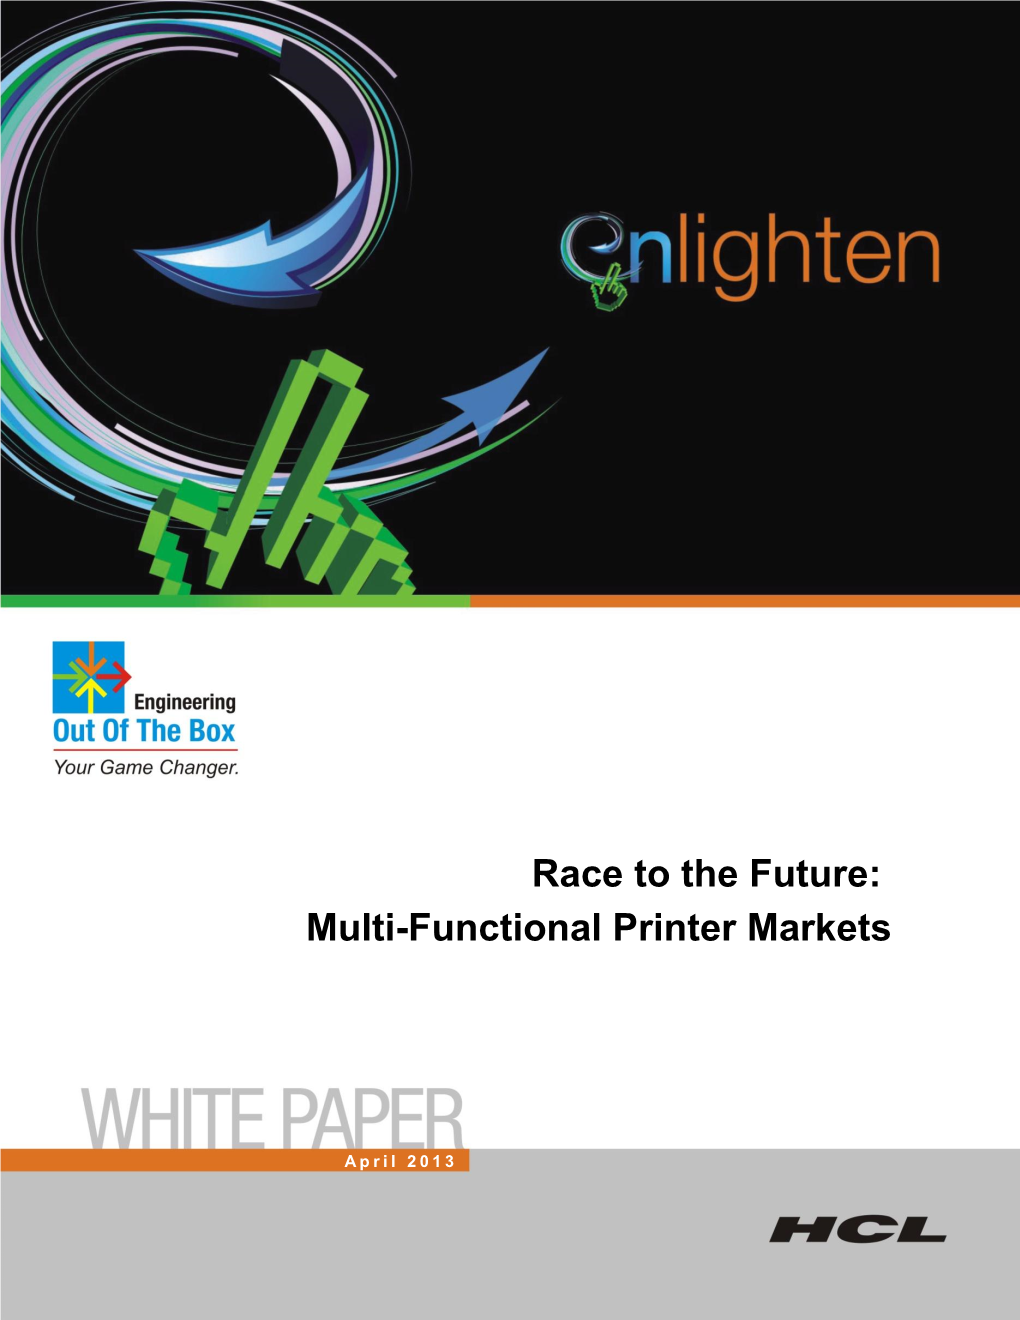 Race to the Future: Multi-Functional Printer Markets